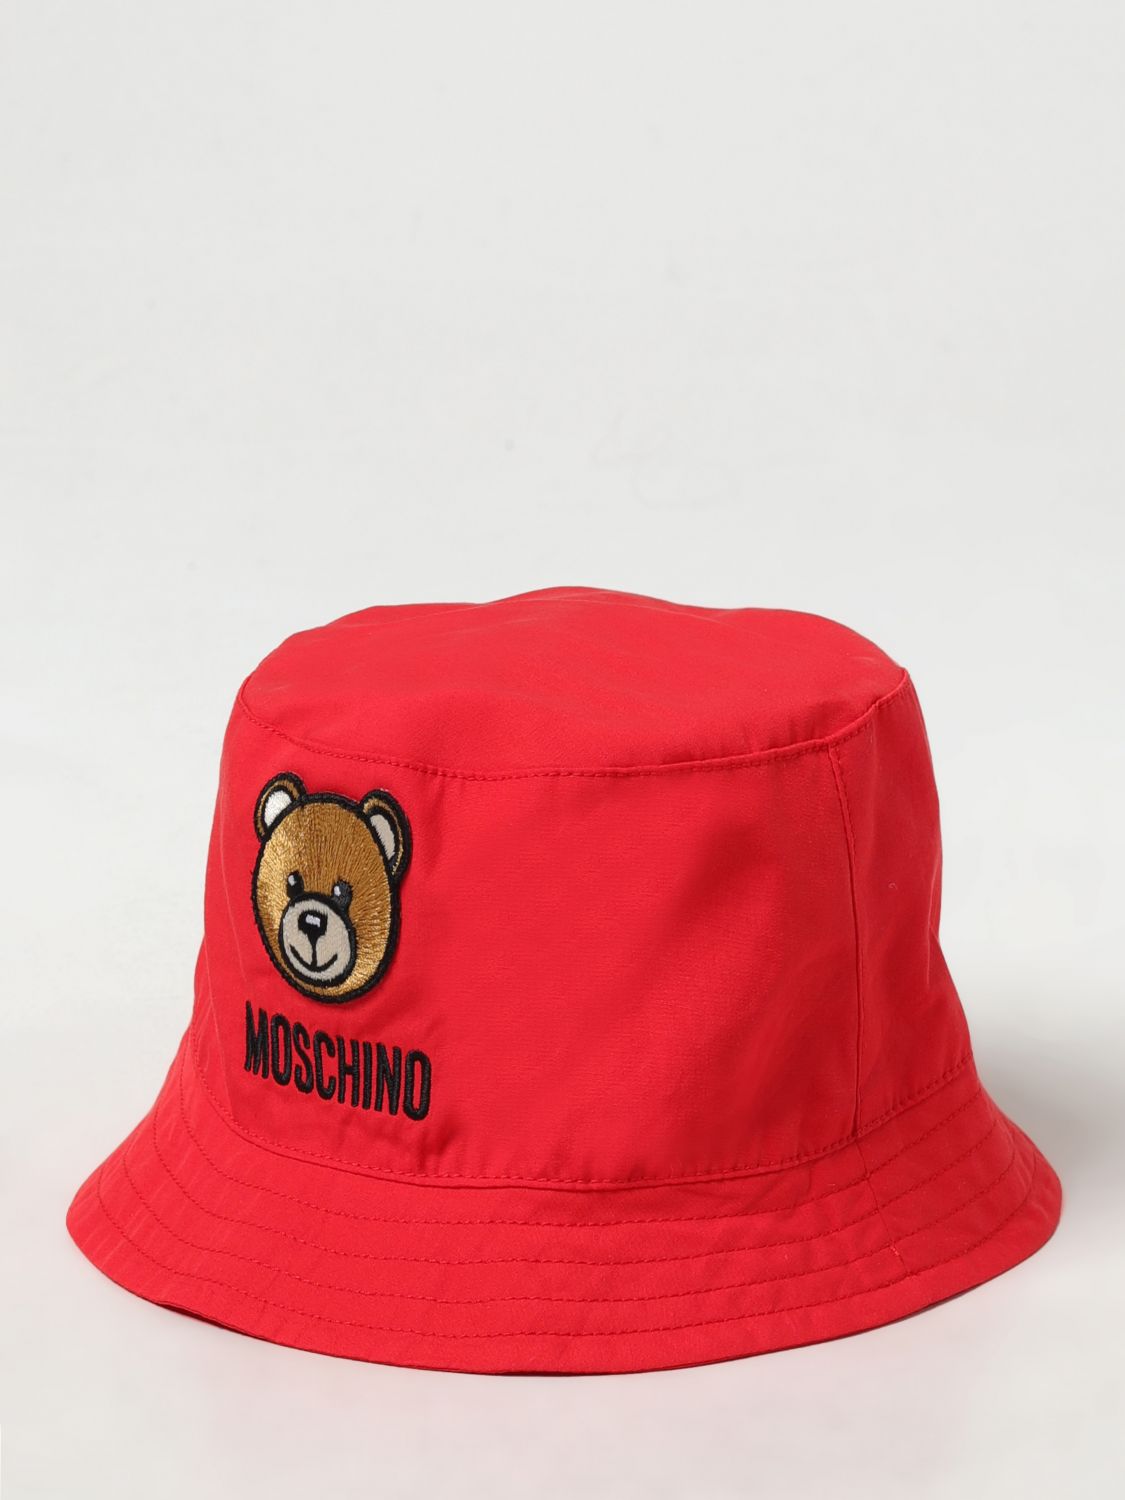 Moschino Baby Hat  Kids Color Red